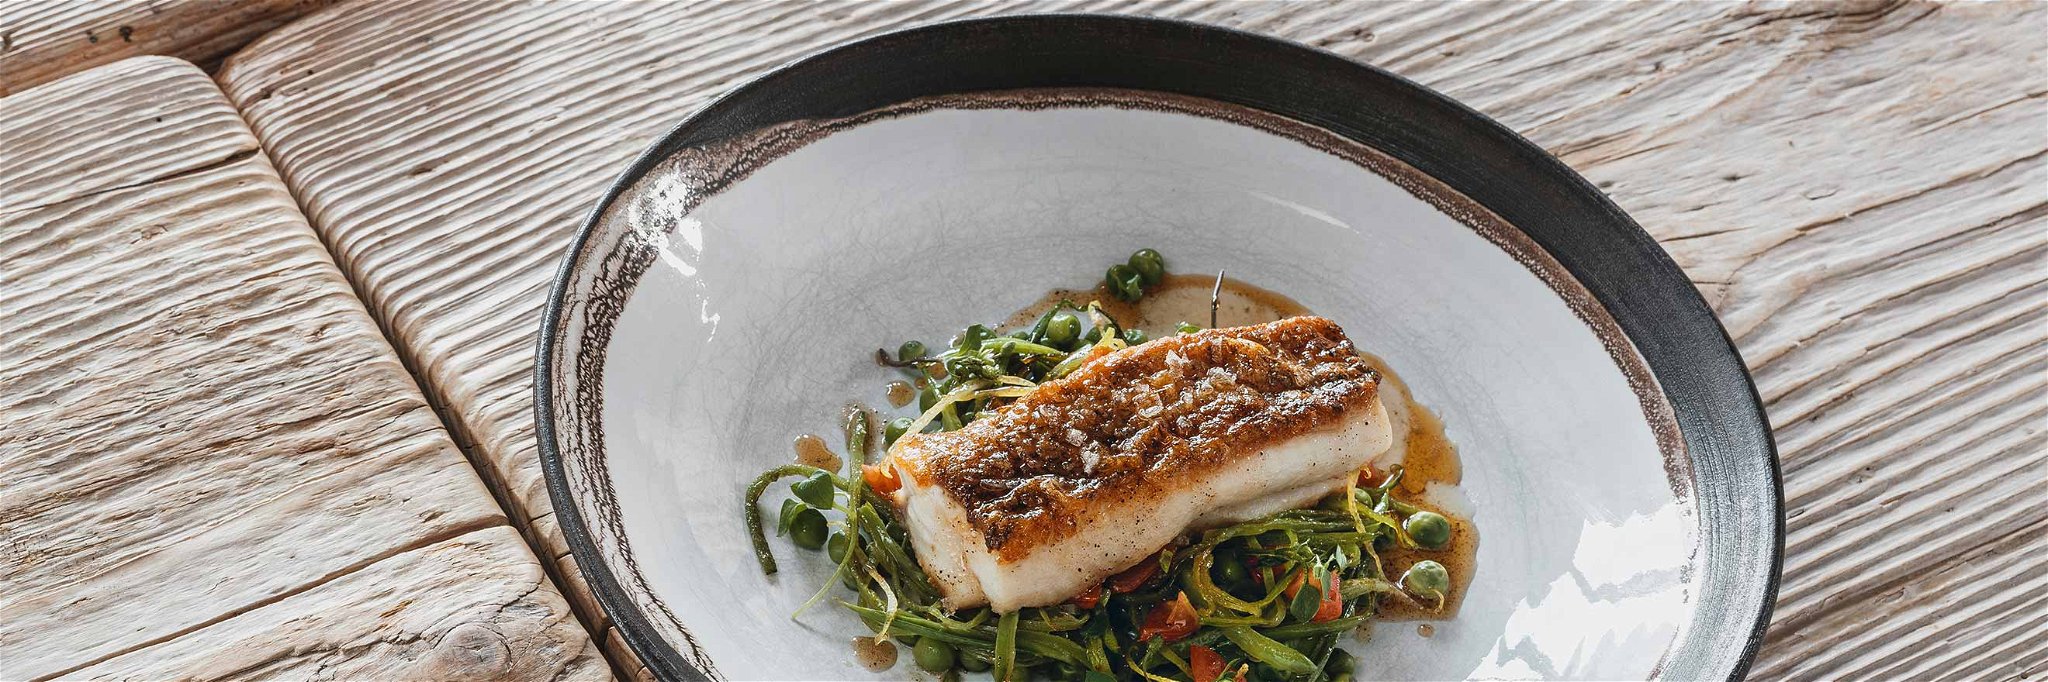 Pan-fried Pike Fillets with Beans and Brown Butter